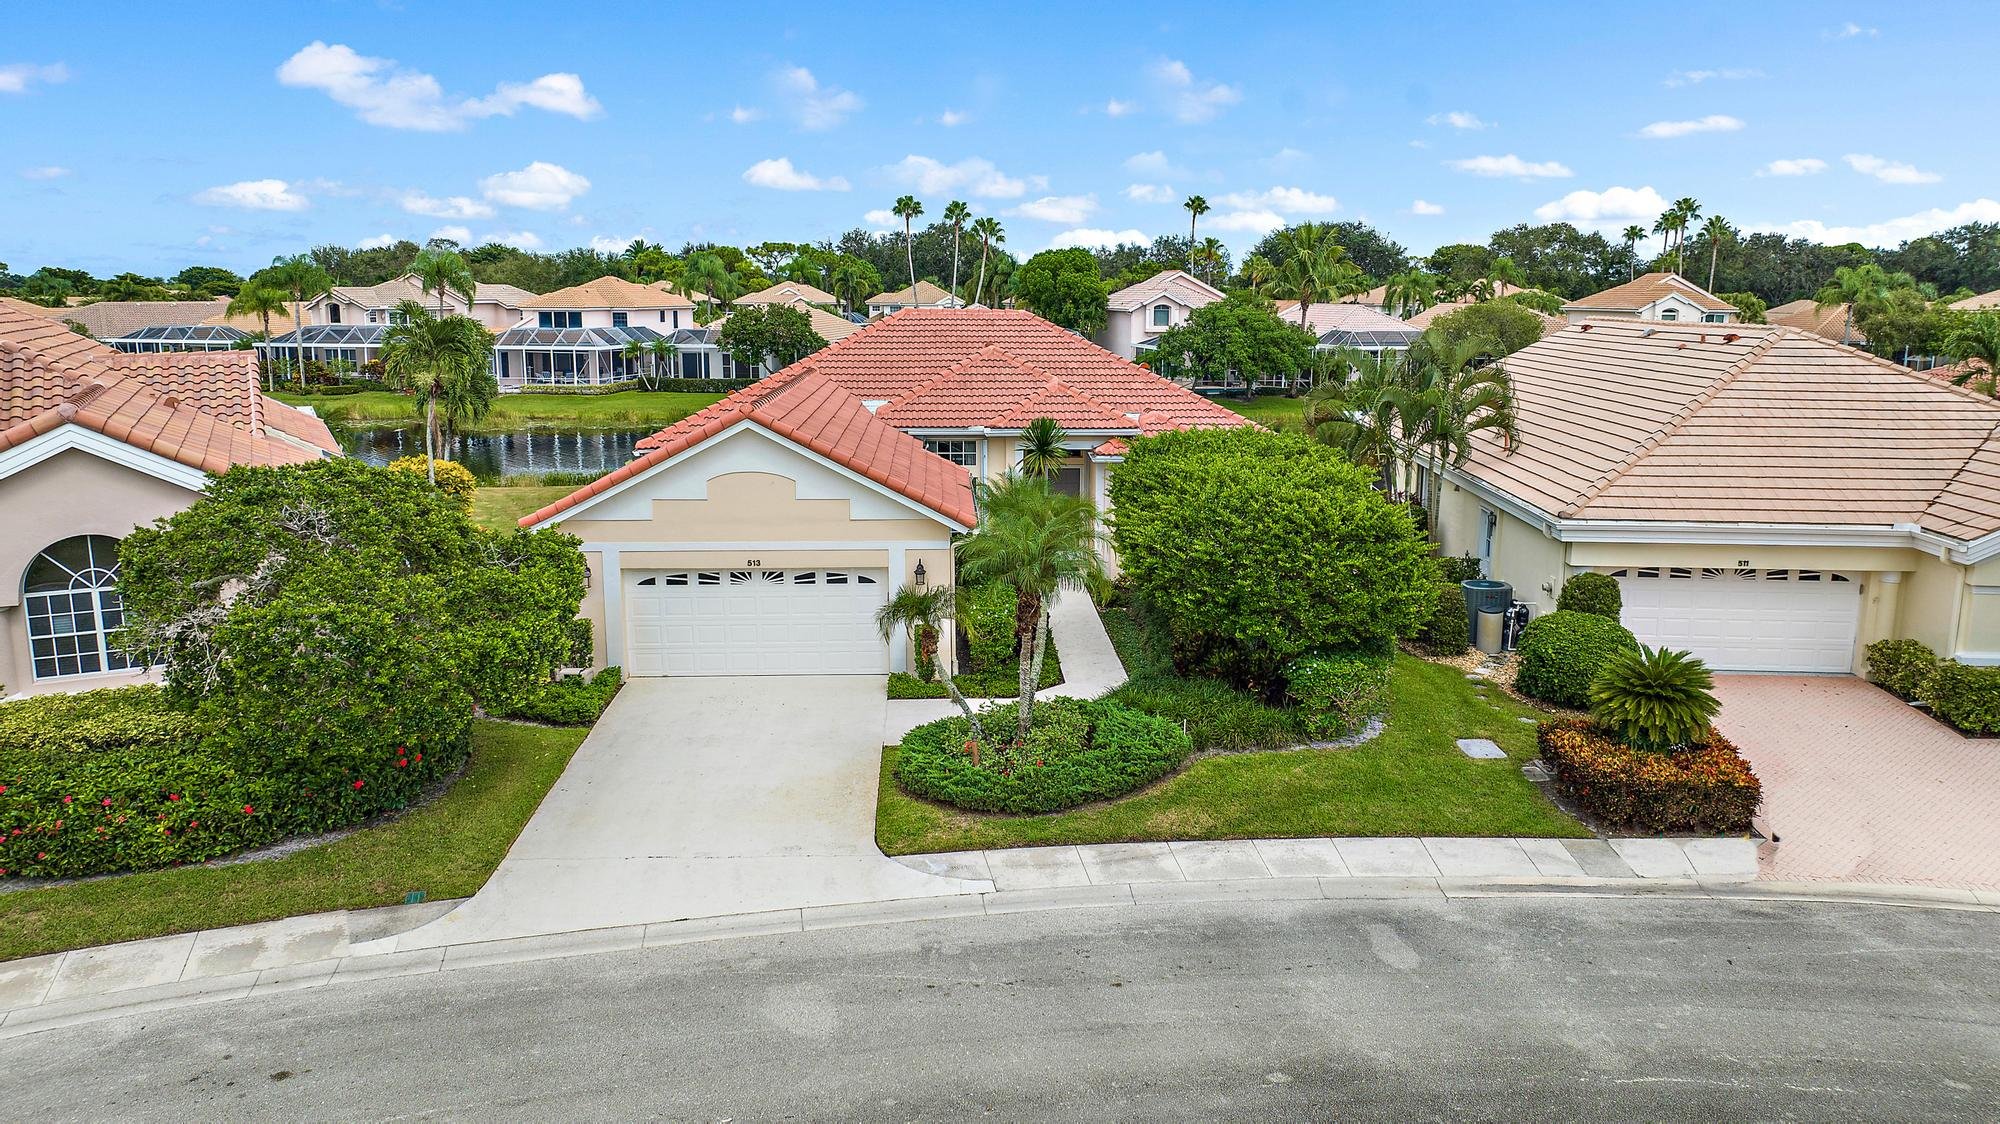 home for sale in palm beach county with stunning pool and backyard 